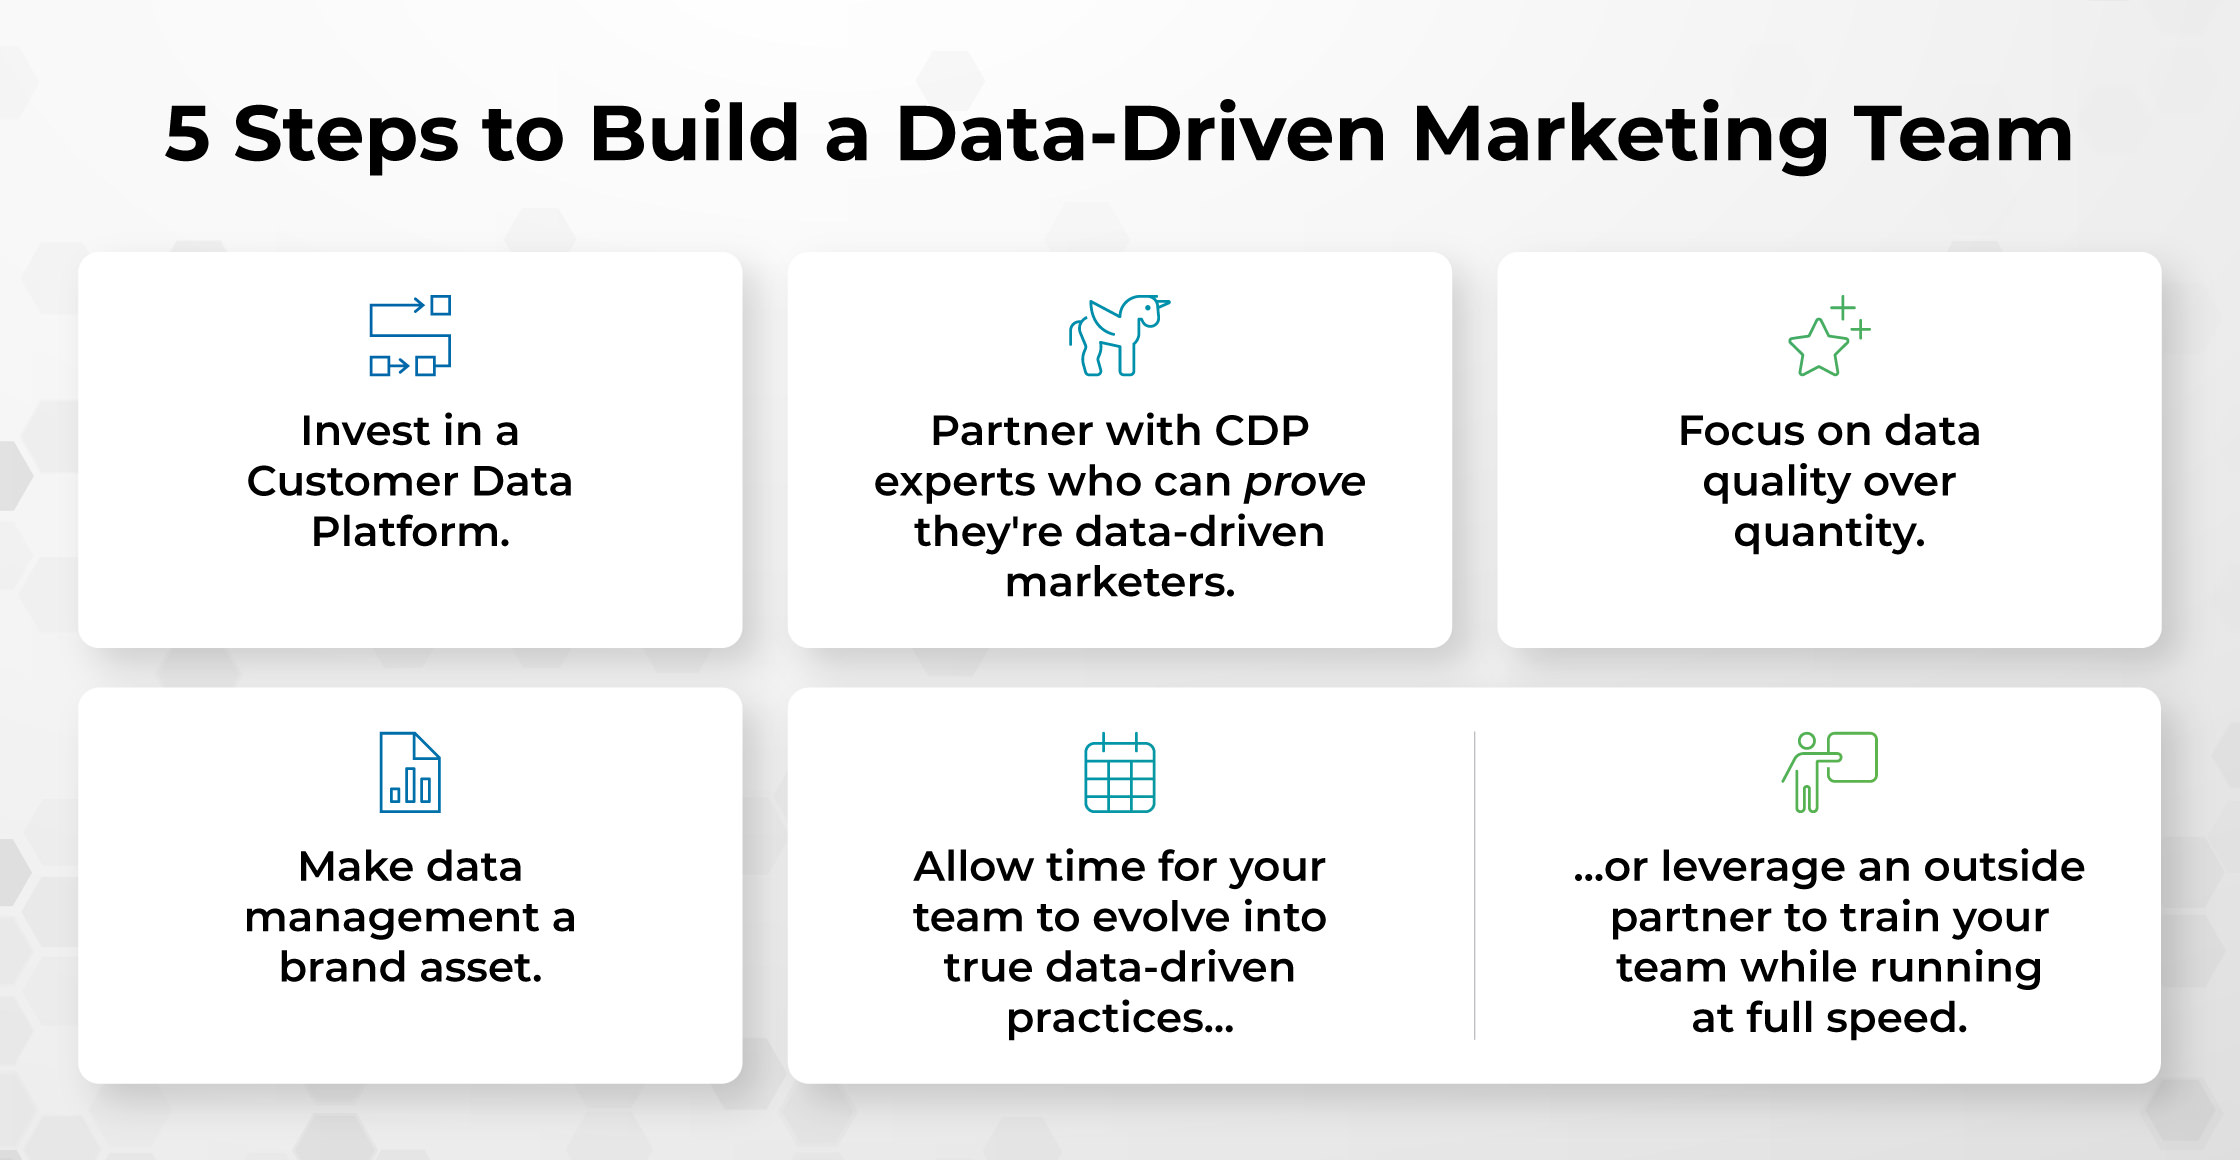 5 Steps to Build a Data-Driven Marketing Team and Strategy.